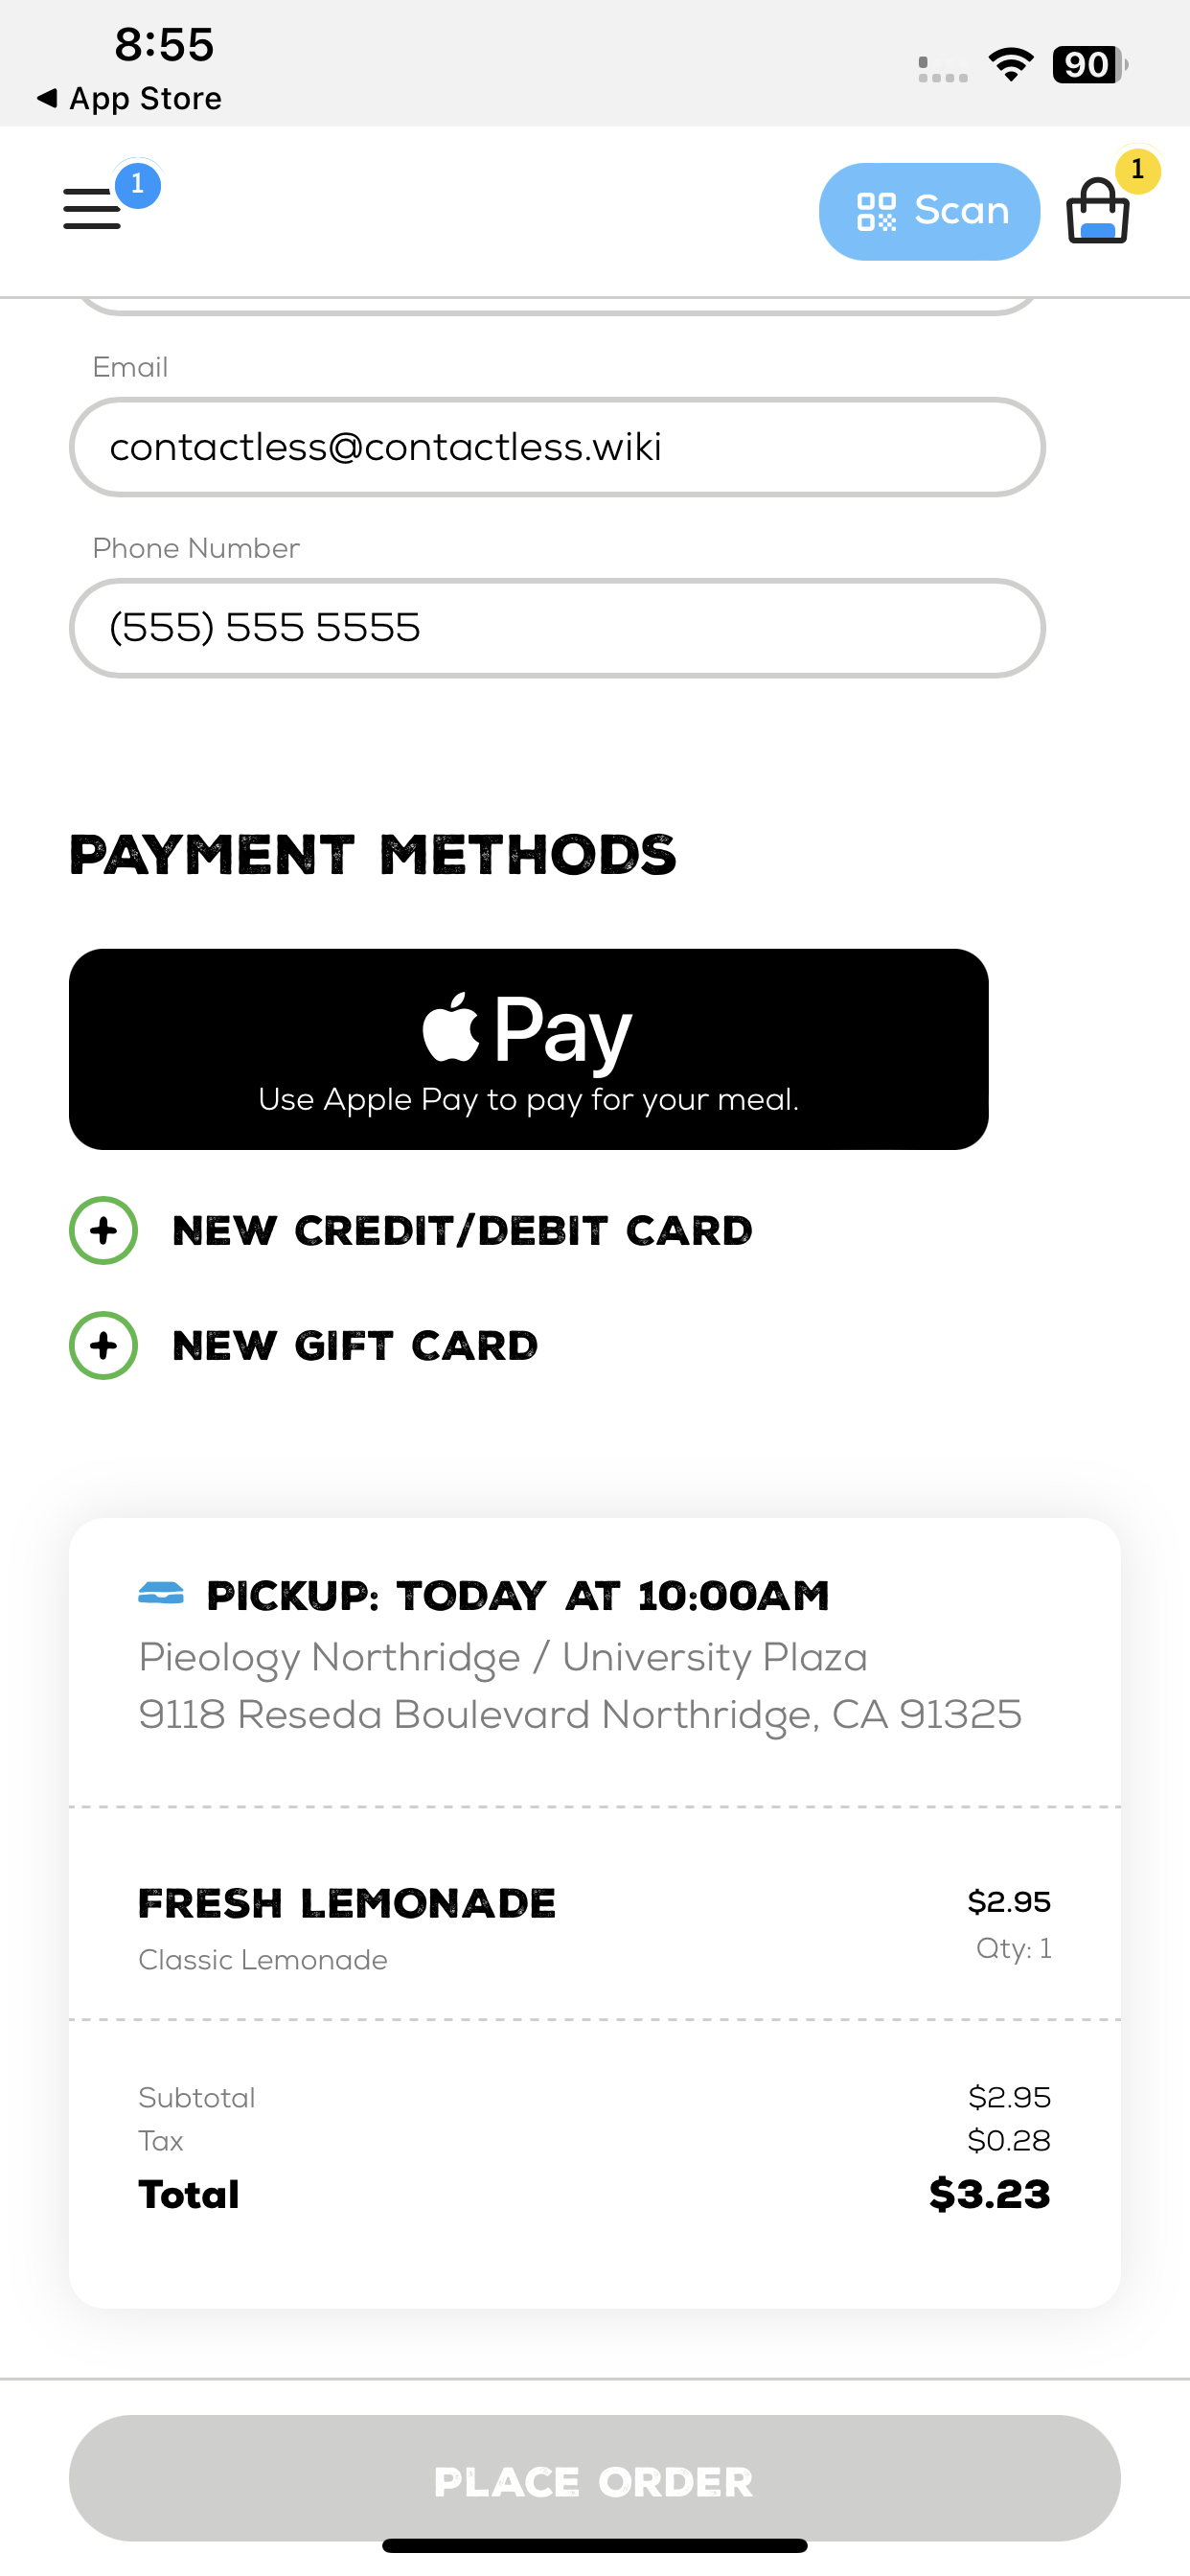 Pieology accepts Apple Pay in its iOS app.